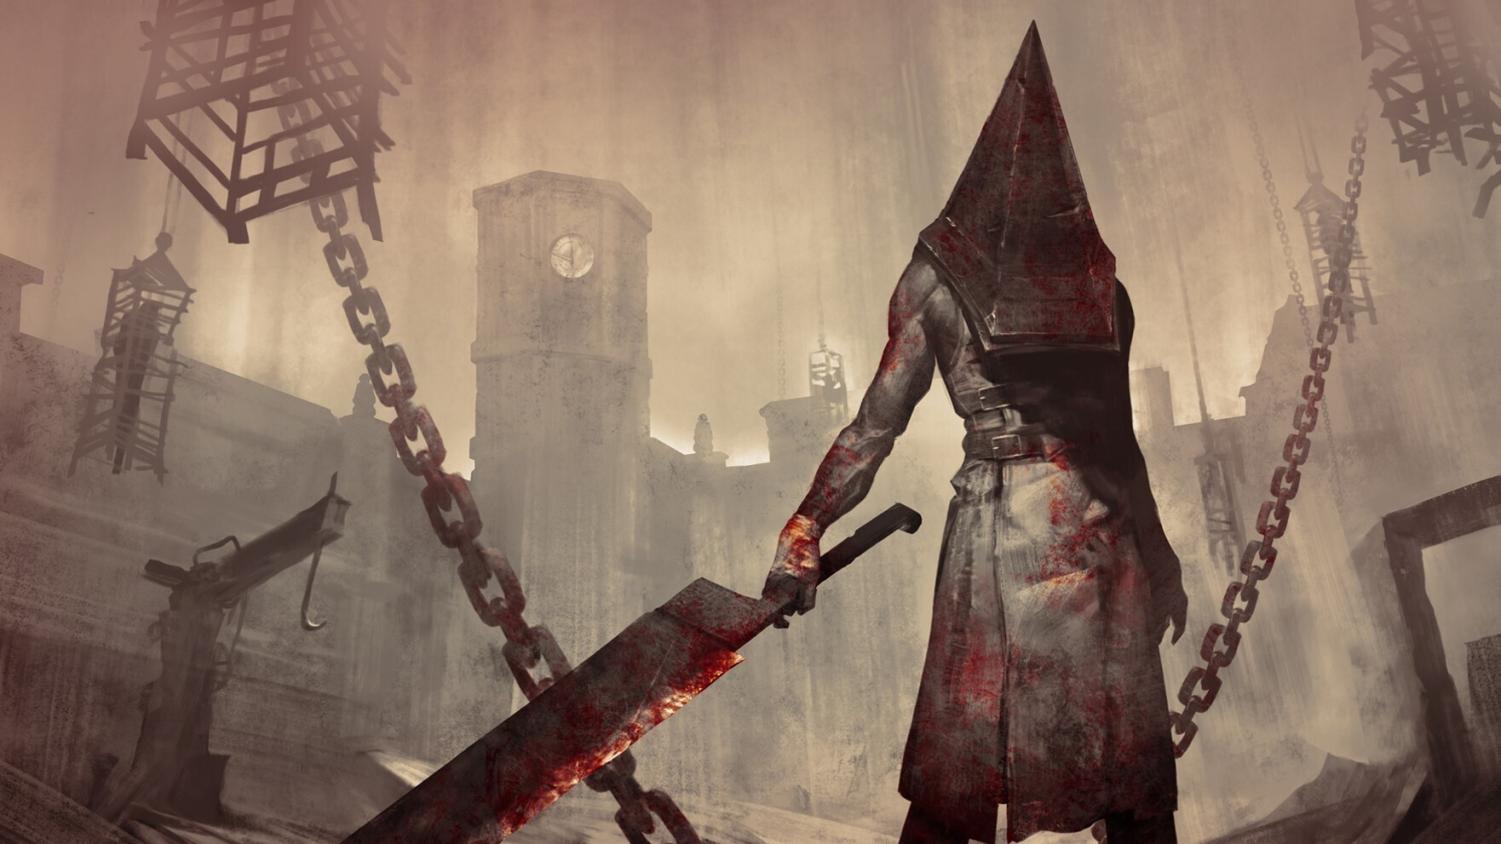 5 things fans expect from the rumored Silent Hill 2 Remake